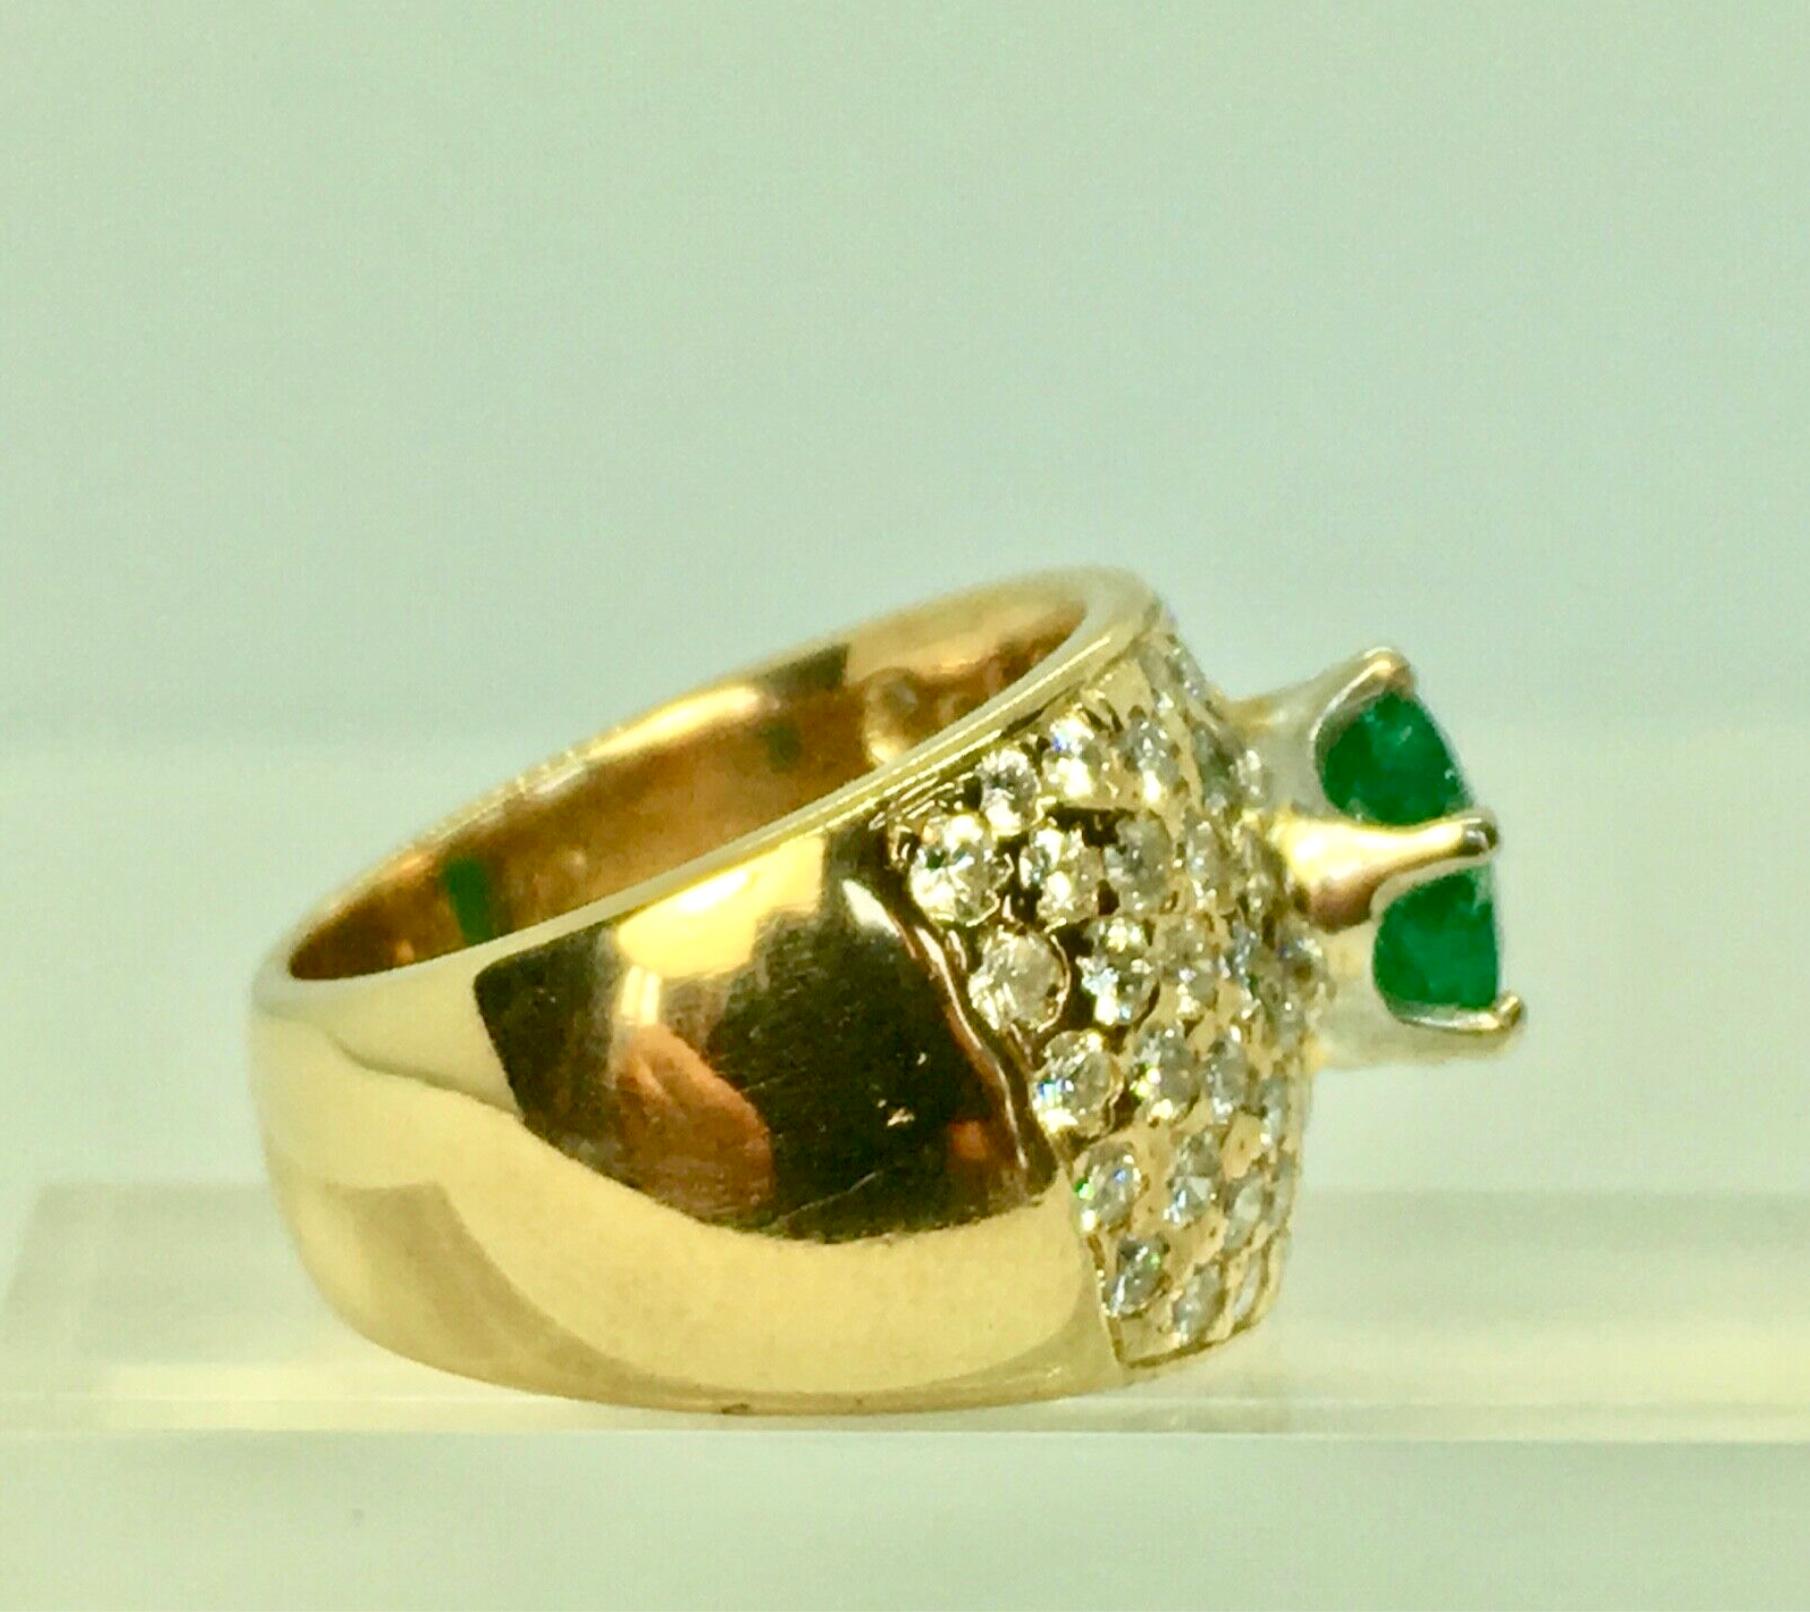 Vintage 4.10 Carat Natural Round Cut Colombian Emerald Diamond Ring For Sale 4